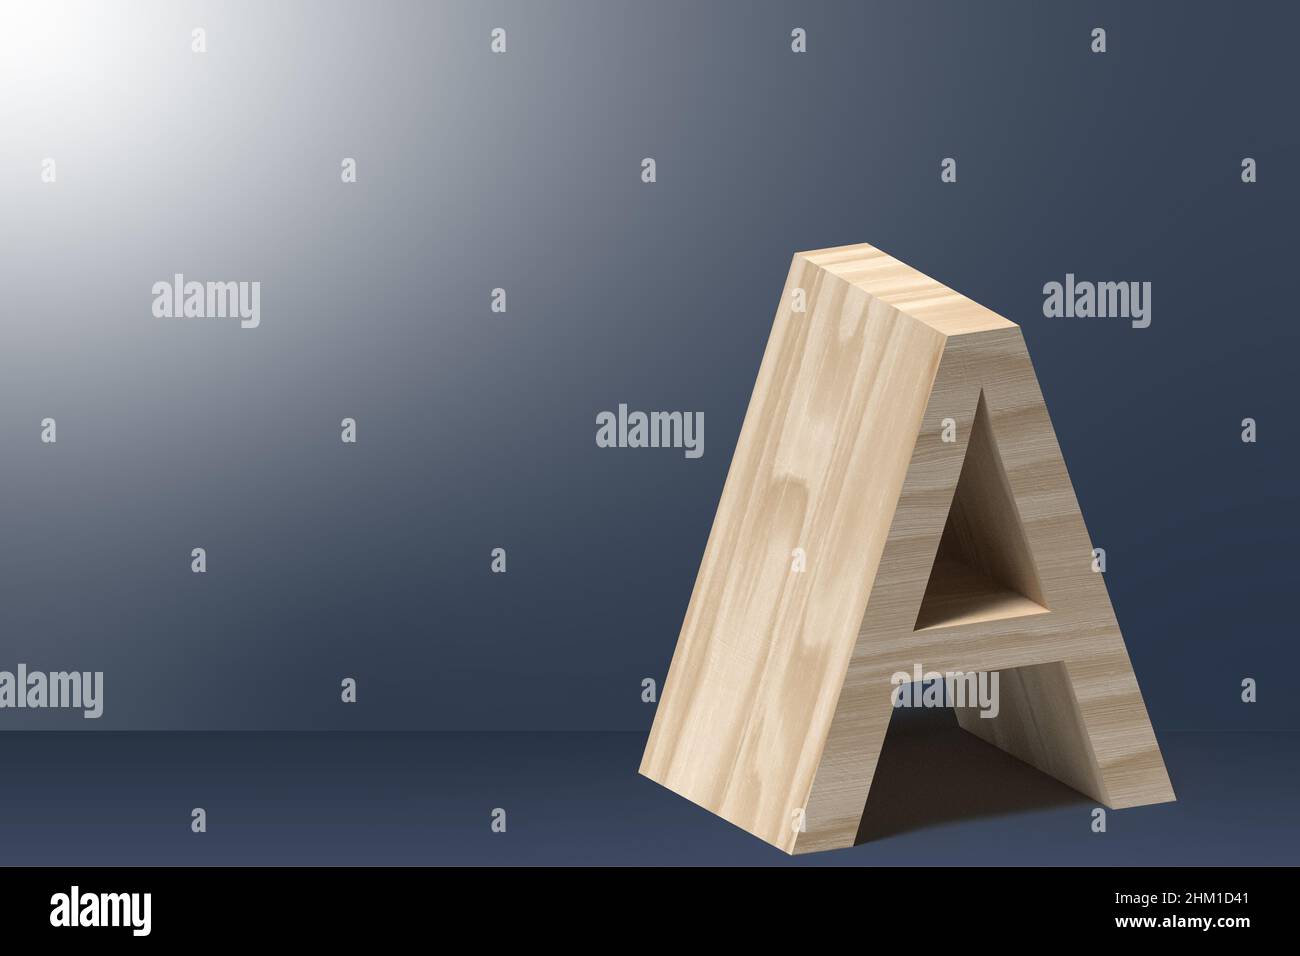 3d Letter A Illustration in Natural Plywood on Shining Gray Background Stock Photo